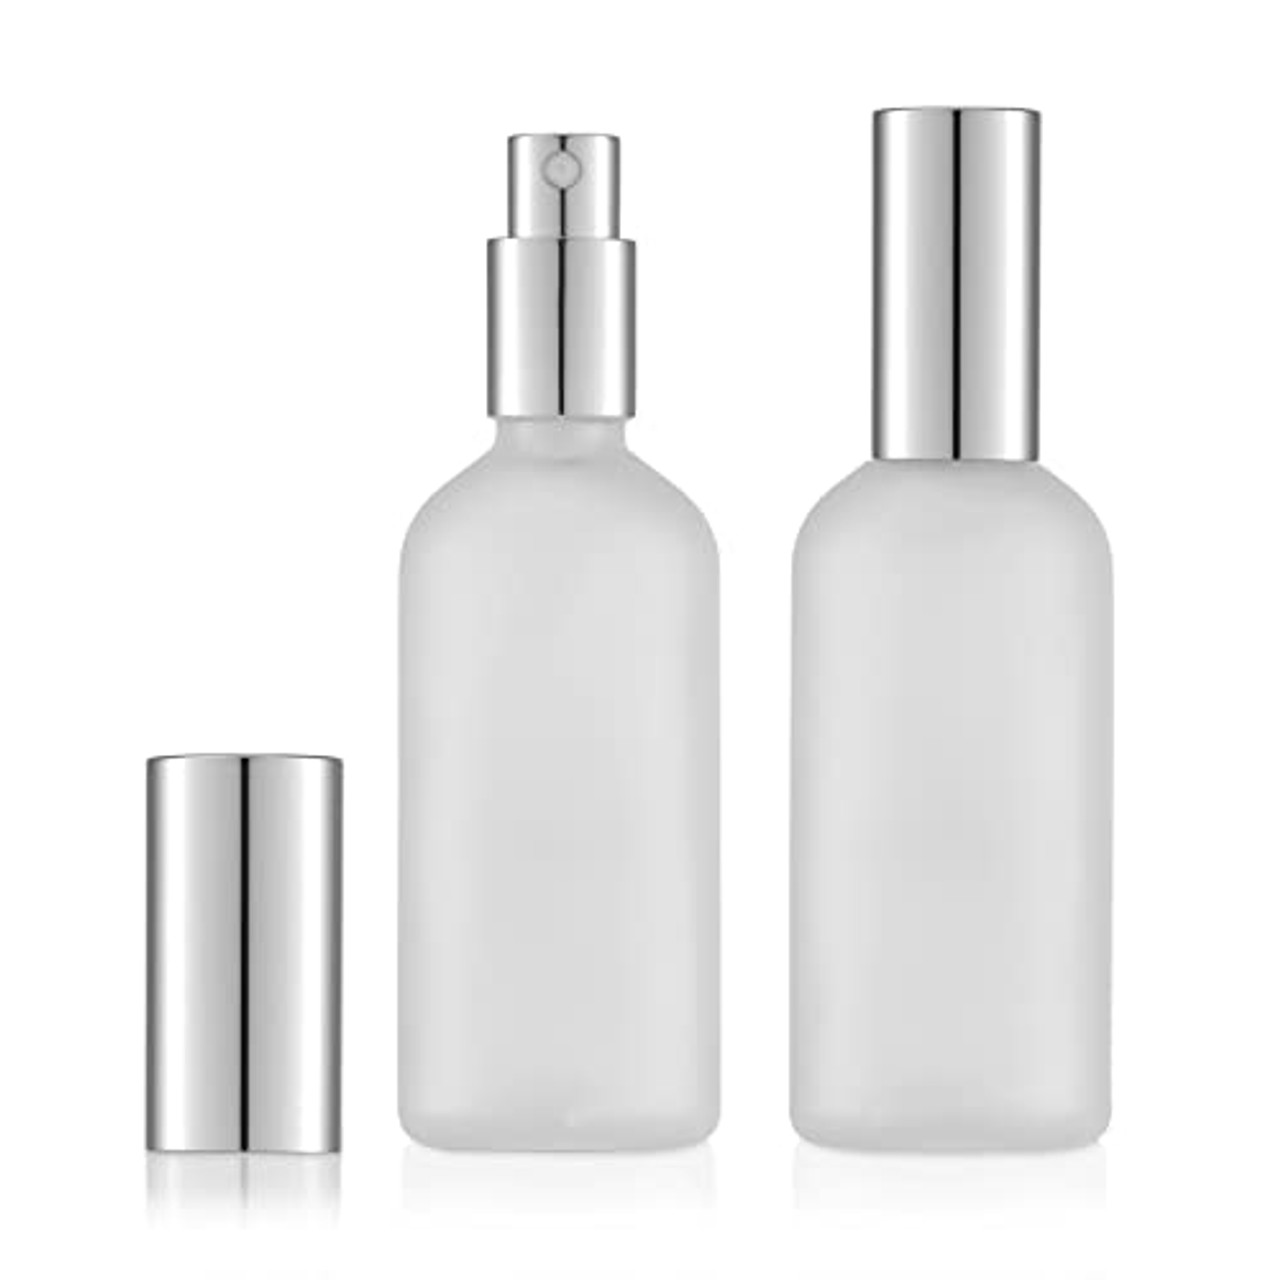 3.4 oz (100ml) Clear Glass Empty Refillable Replacement Glass Perfume or  Cologne Bottle with Spray A…See more 3.4 oz (100ml) Clear Glass Empty